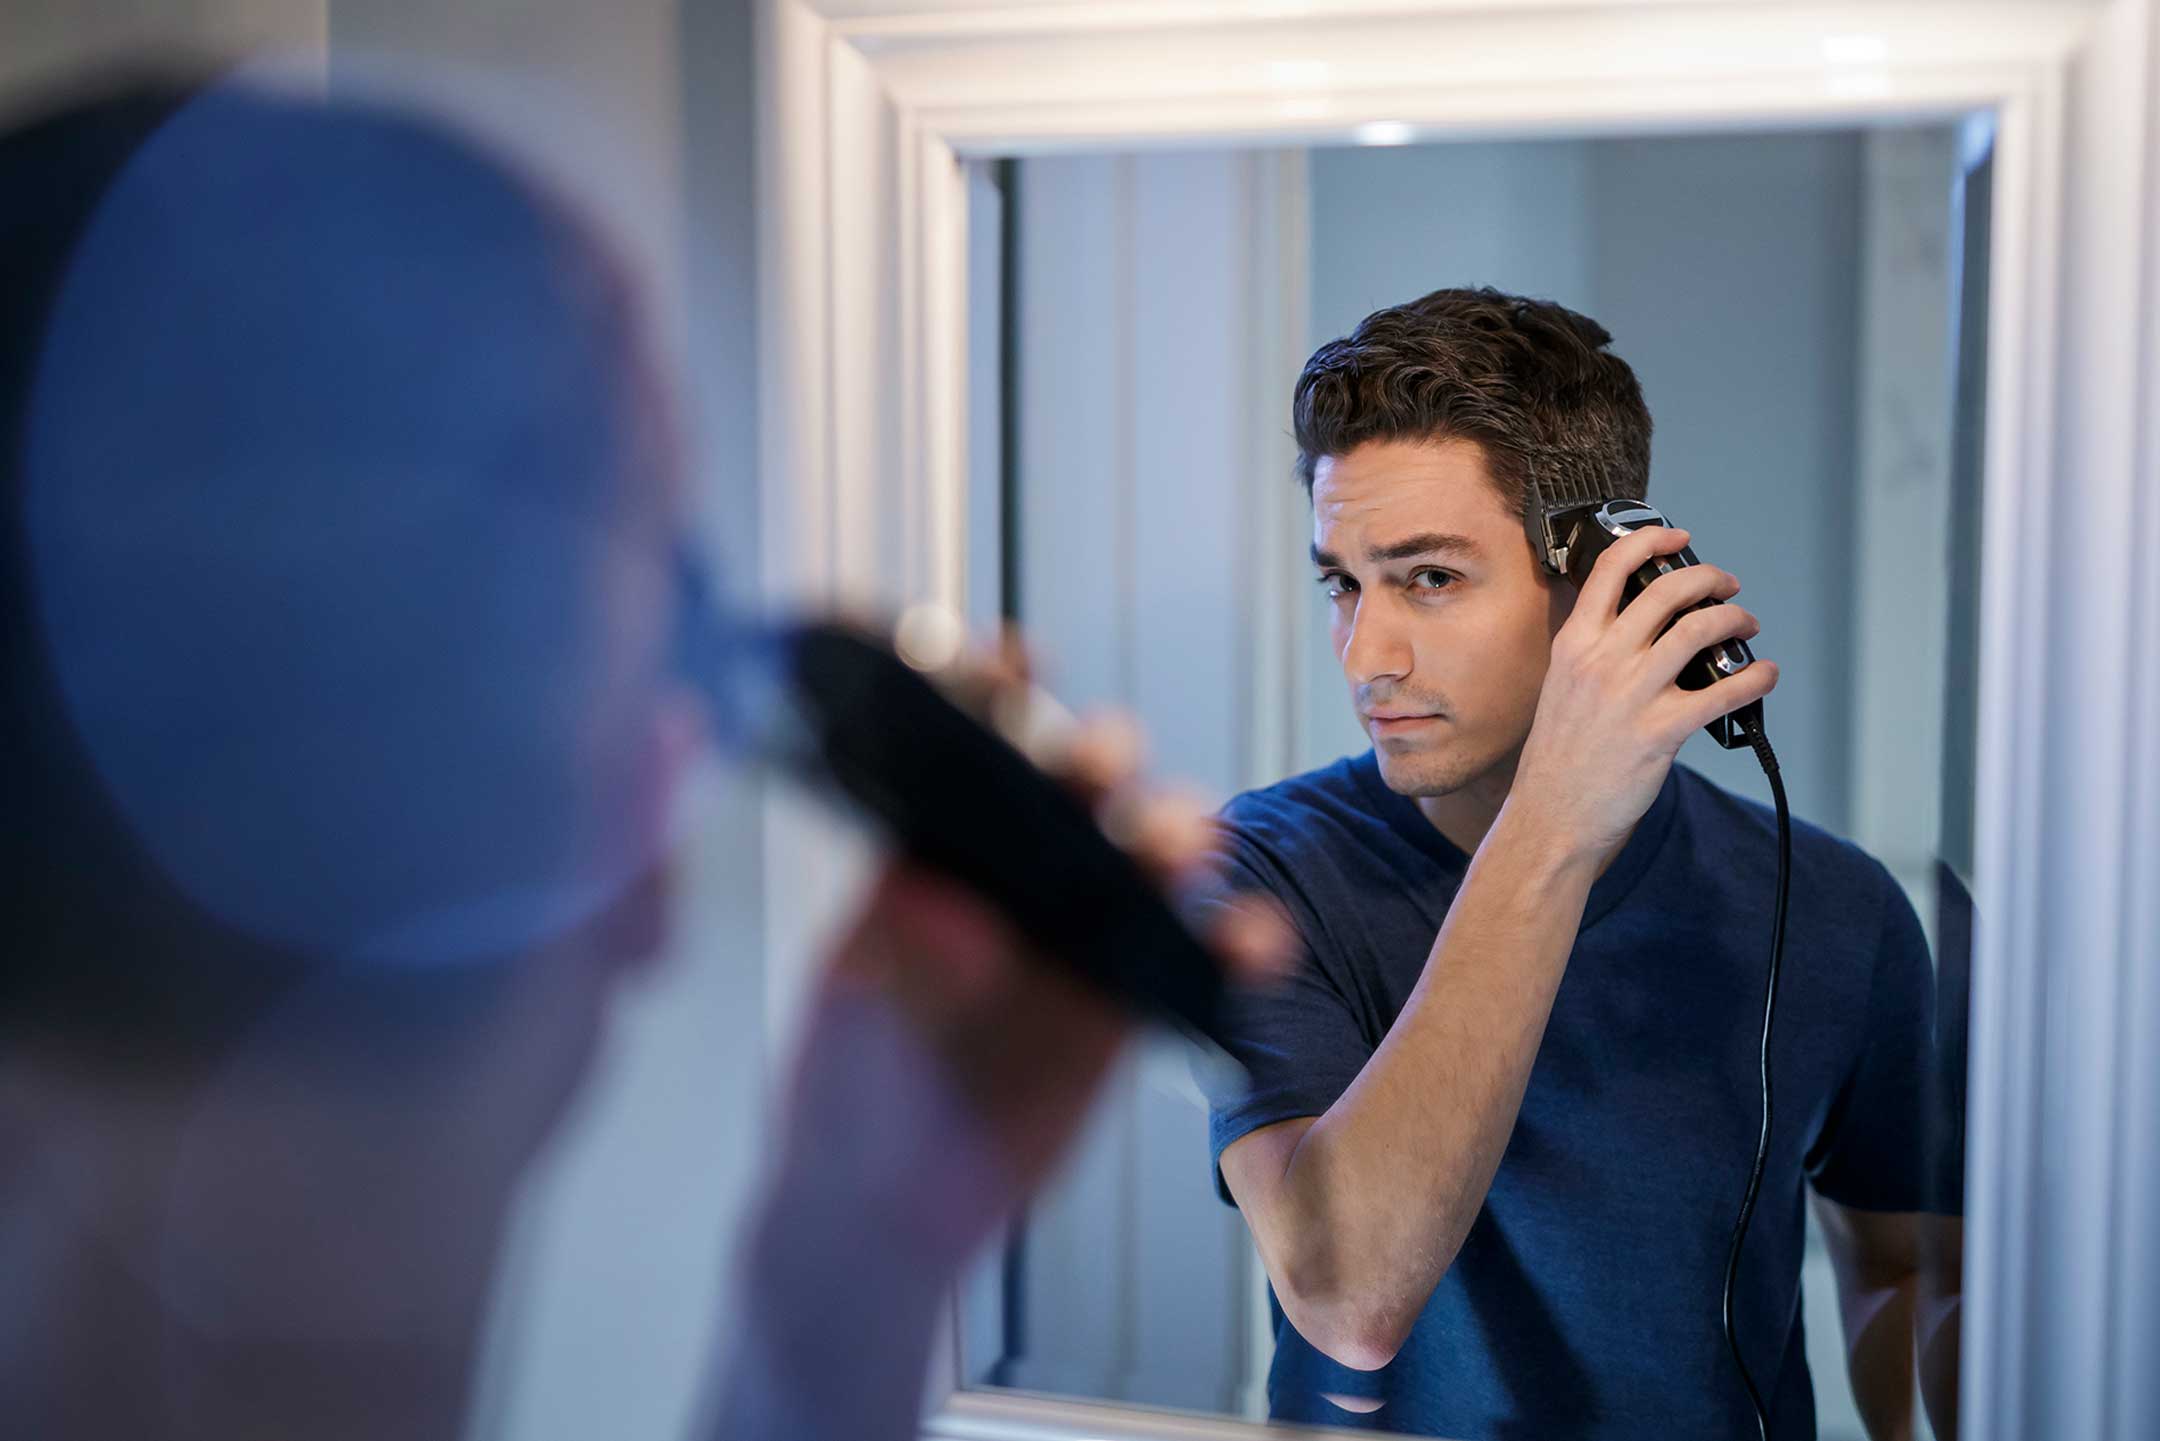 In the wake of sweeping COVID-19 changes like social distancing and the shuttering of businesses, home haircuts — buzz cuts in particular — are more popular than ever. Wahl, the company that invented the first handheld electric clipper 101 years ago, is here to help with tips and tools to get this look.